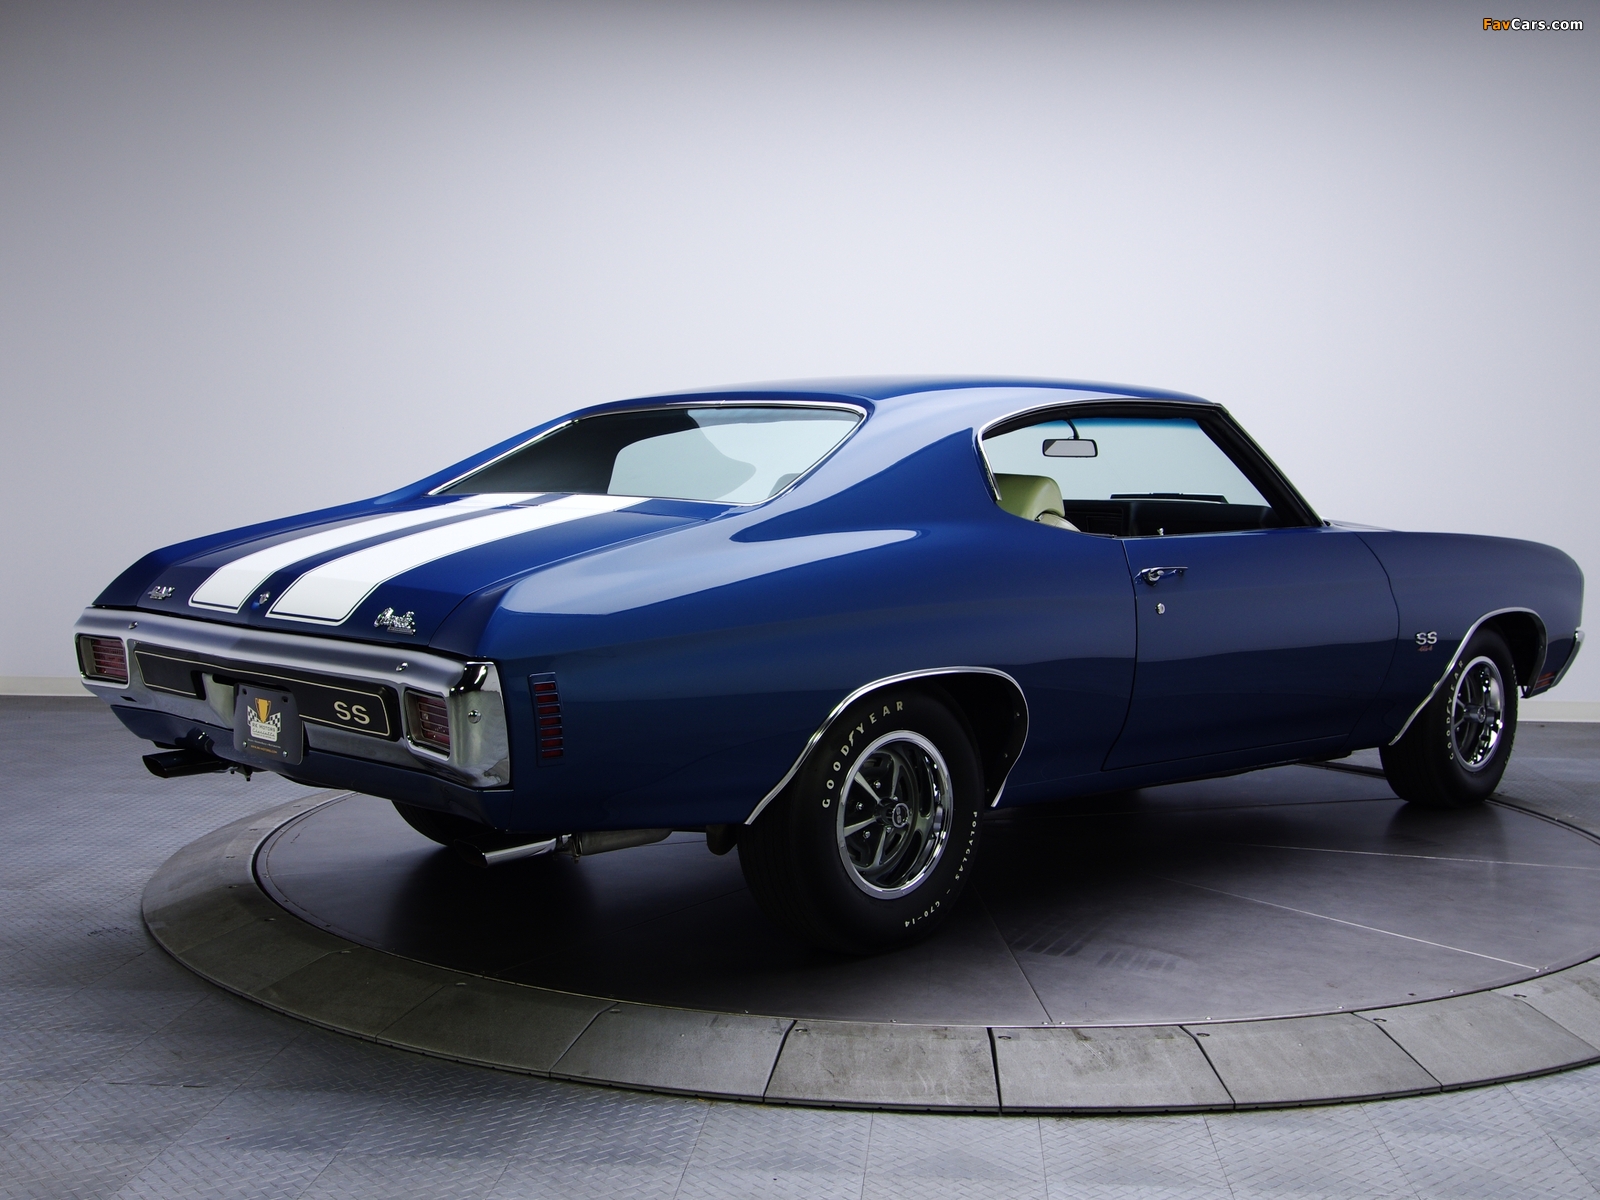 Chevrolet Chevelle SS 454 LS6 Hardtop Coupe 1970 1600x1200